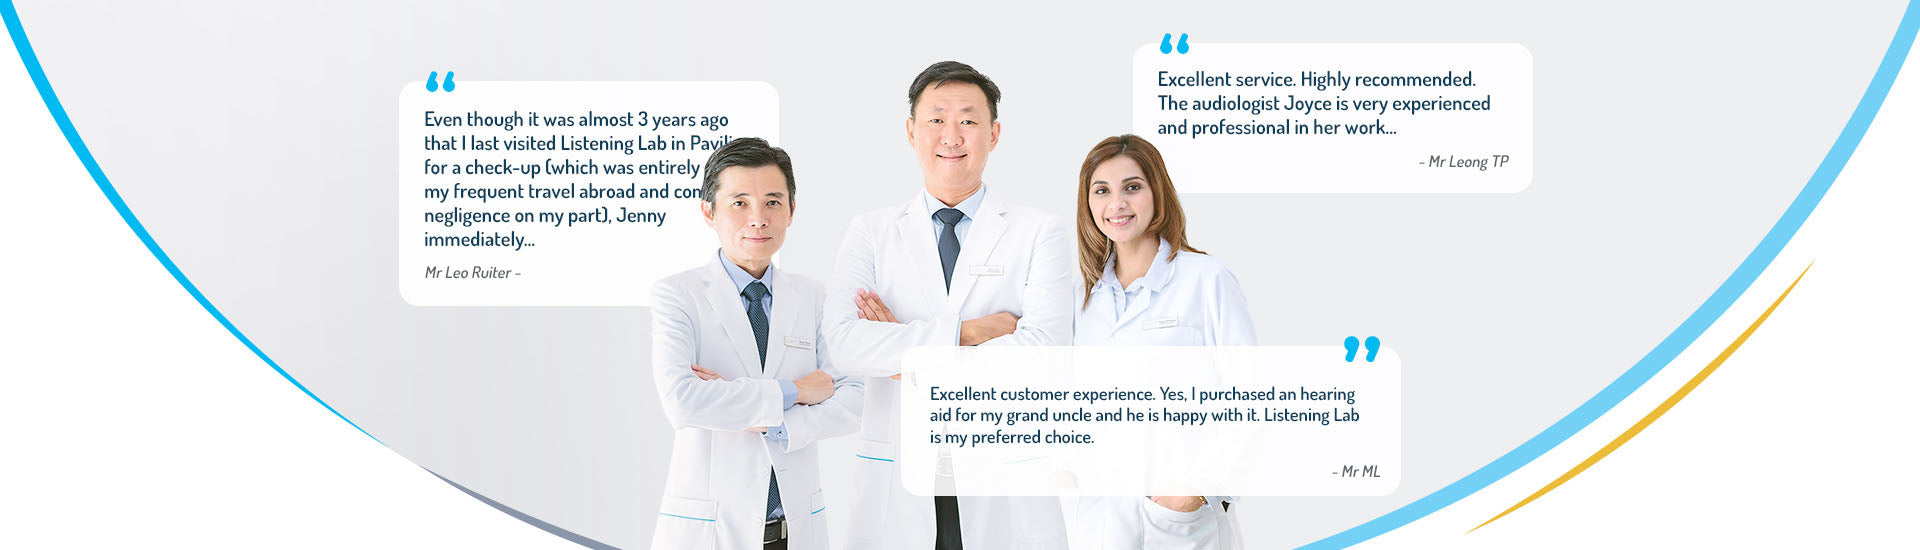 Welcome to Listening Lab Testimonial